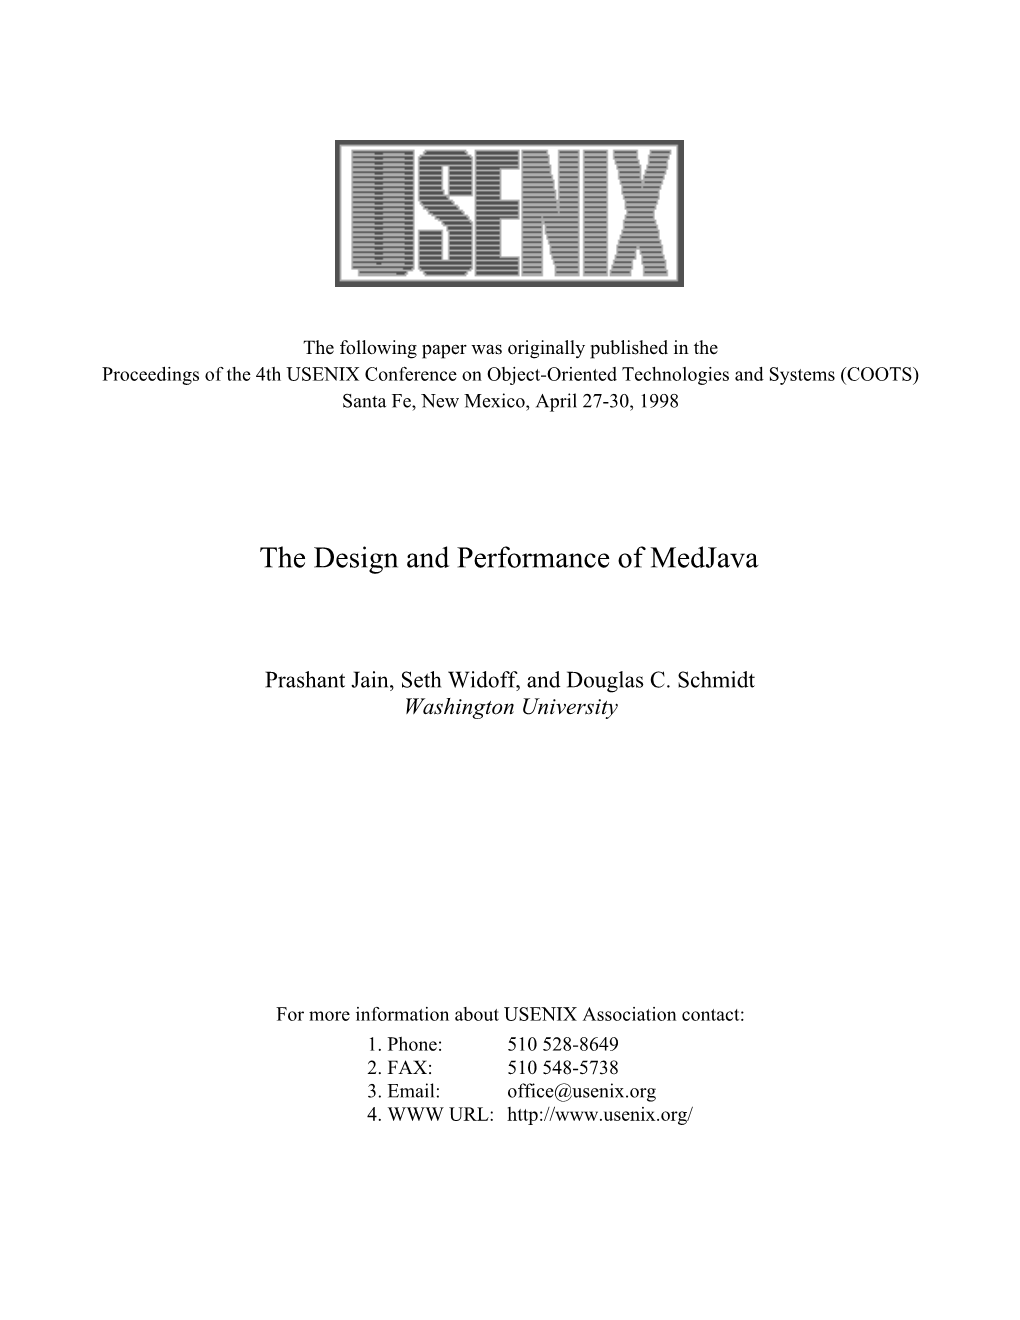 The Design and Performance of Medjava